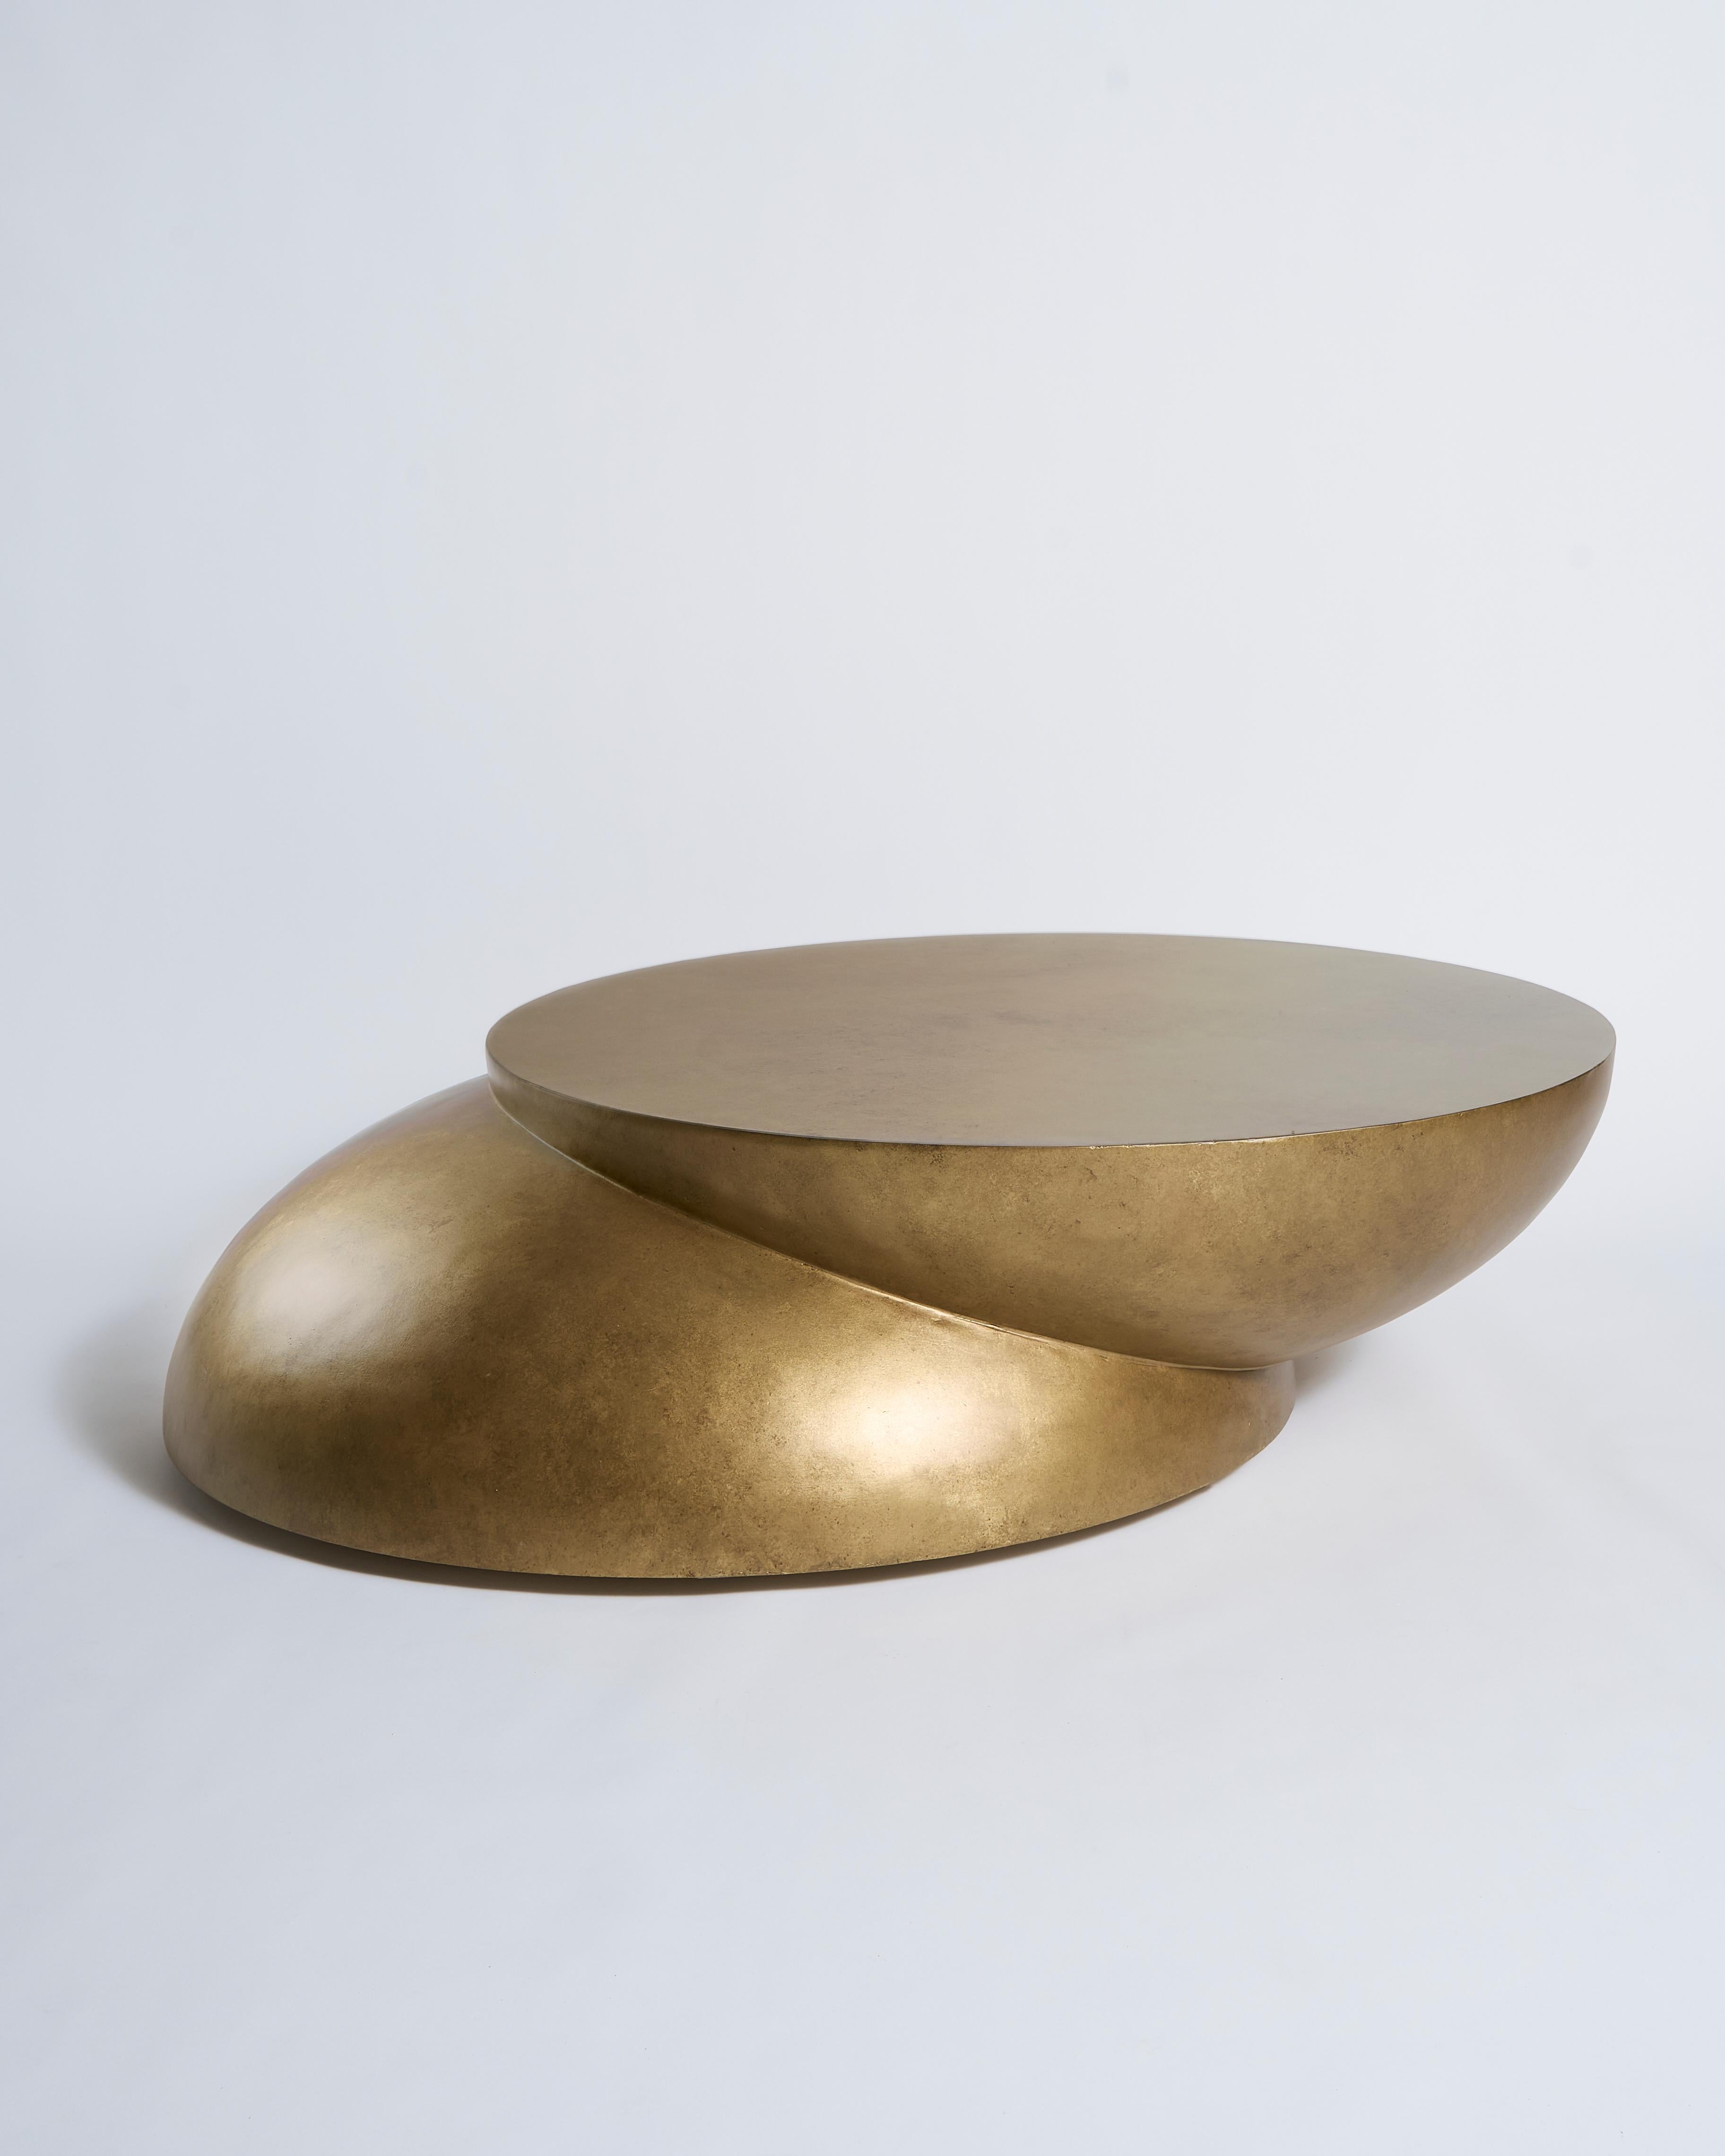 Forever Together coffee table by Pietro Franceschini.
Dimensions: W 129 x L 100 x H 32 cm.
Materials: Plaster.

Pietro Franceschini is an architect and designer based in New York and Florence. He was educated in Italy, Portugal and United States.